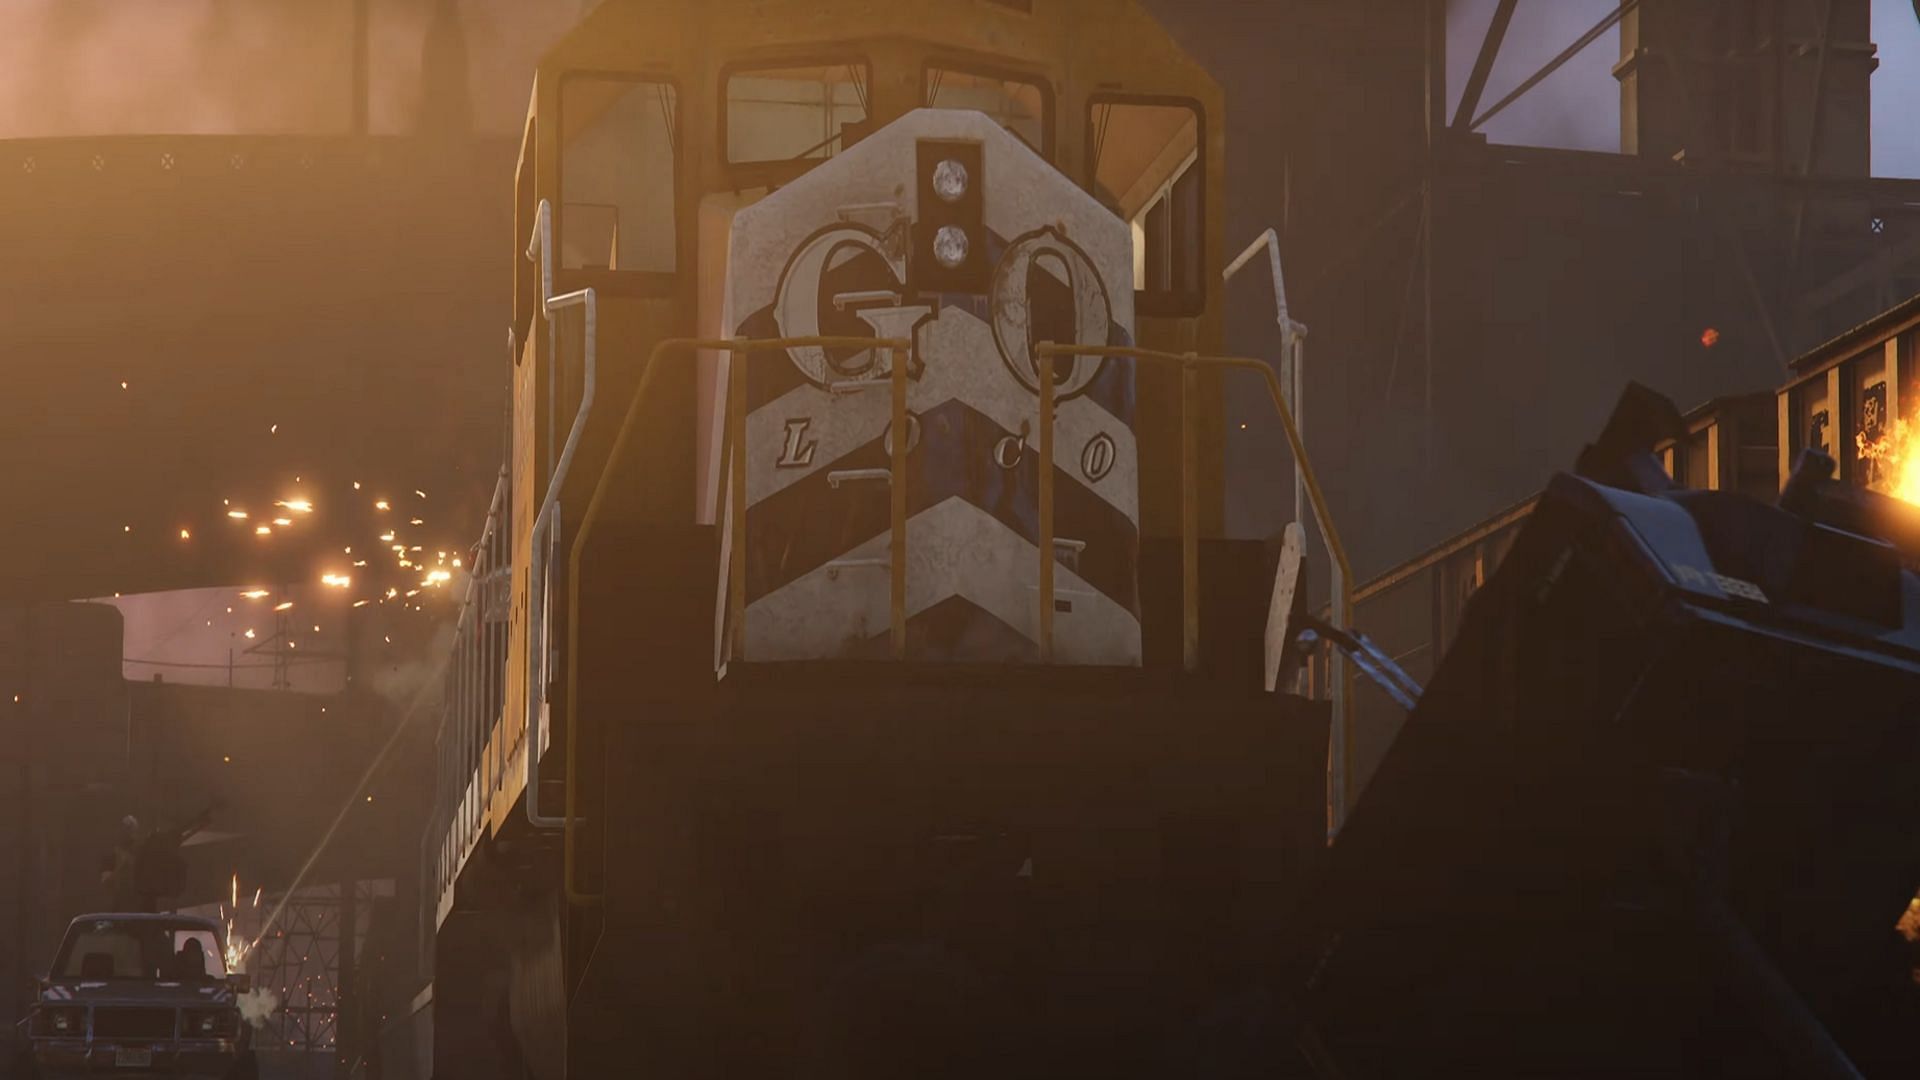 A new train mission might be coming to the game (Image via Rockstar Games)